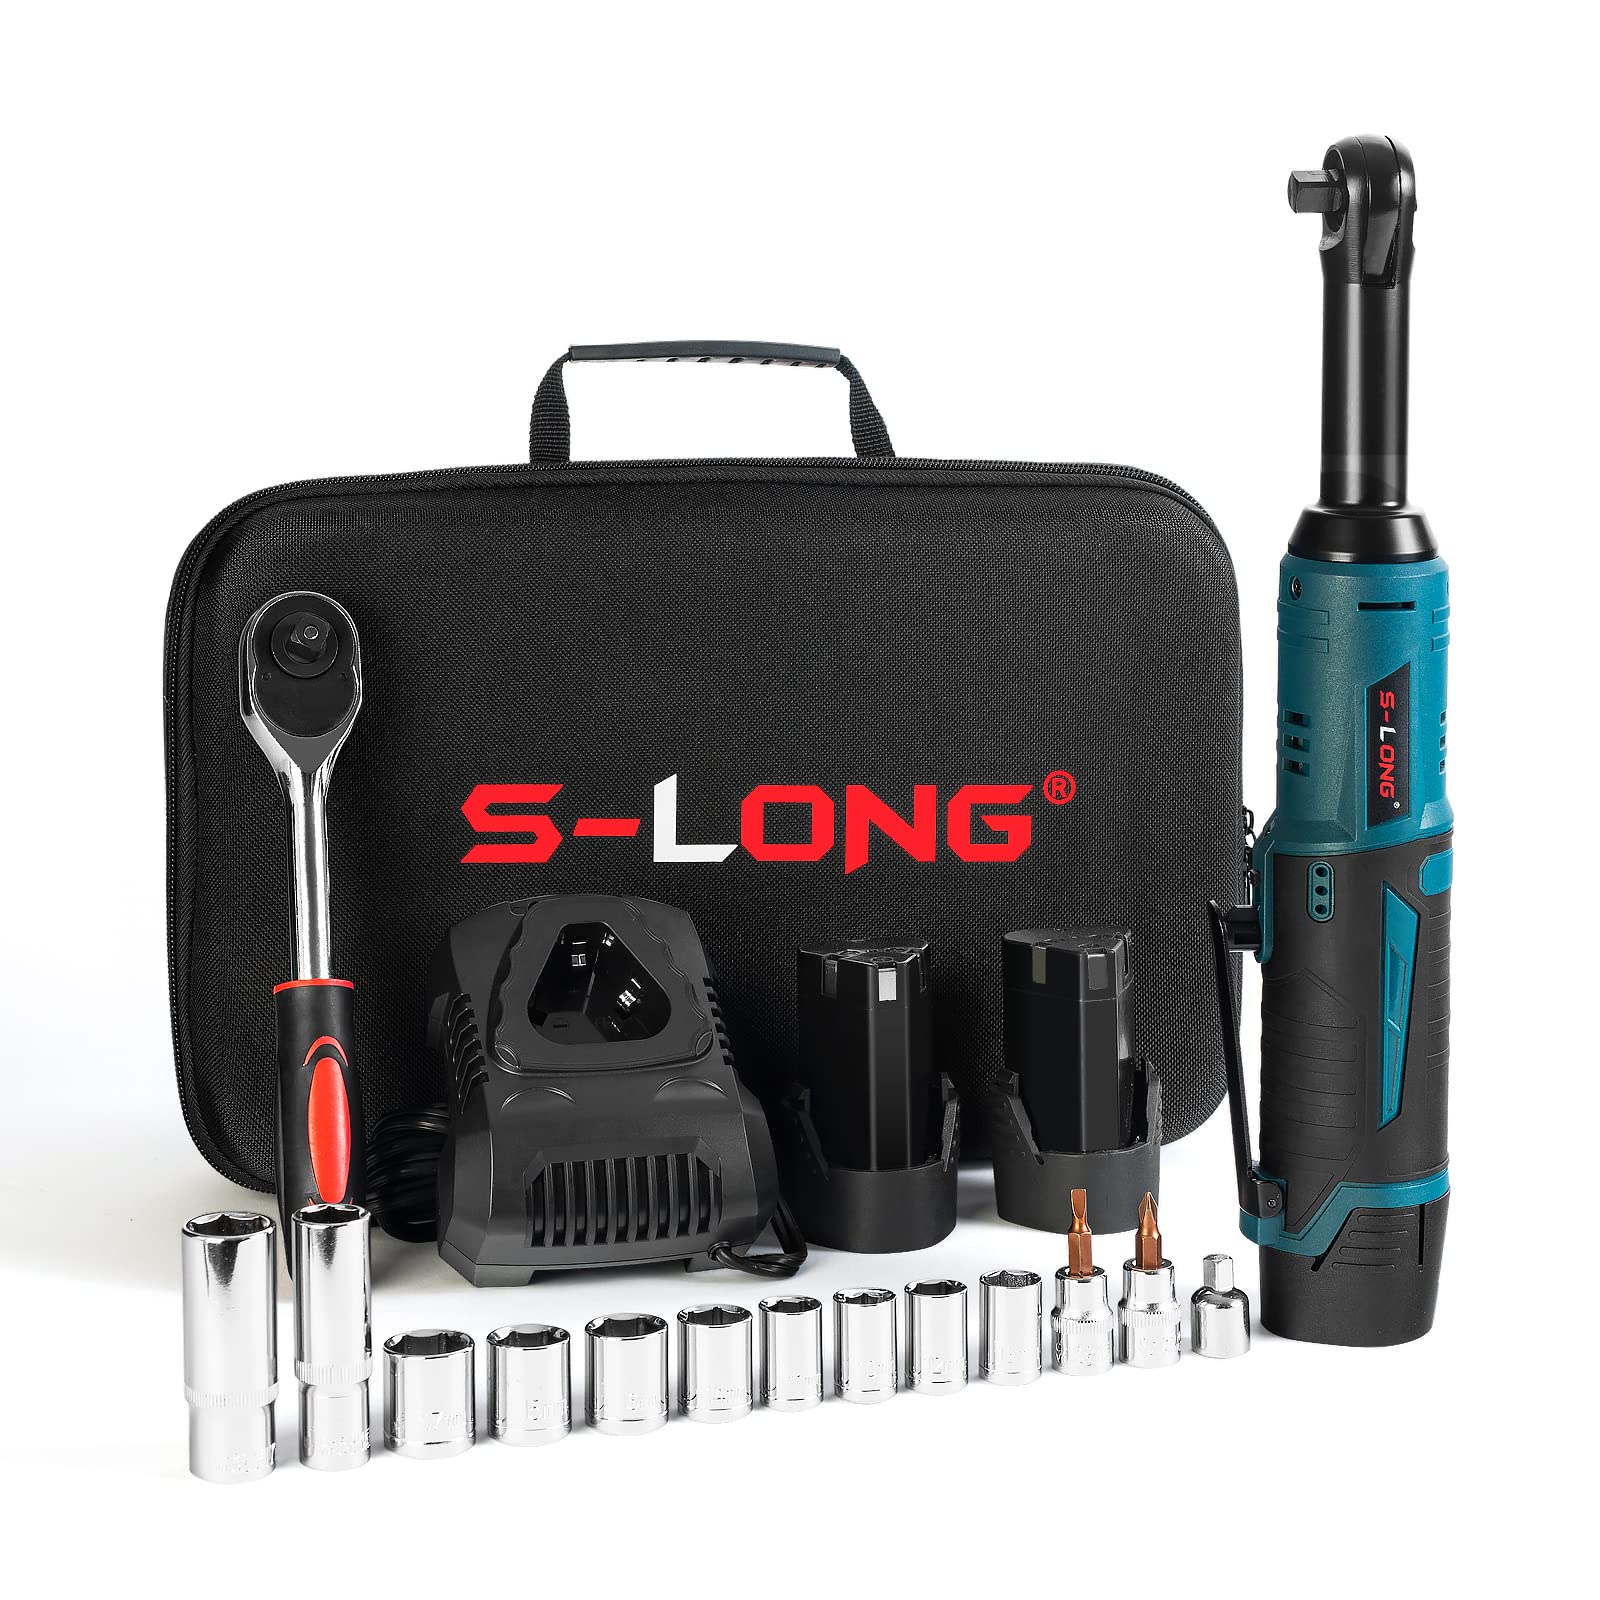 S-LONG Extended Cordless Ratchet Wrench Set, 3/8" 400 RPM 12V Power Electric Ratchet Driver with 12 Sockets, Two 2000mAh Lithium-Ion Batteries and 60-Min Fast Charge